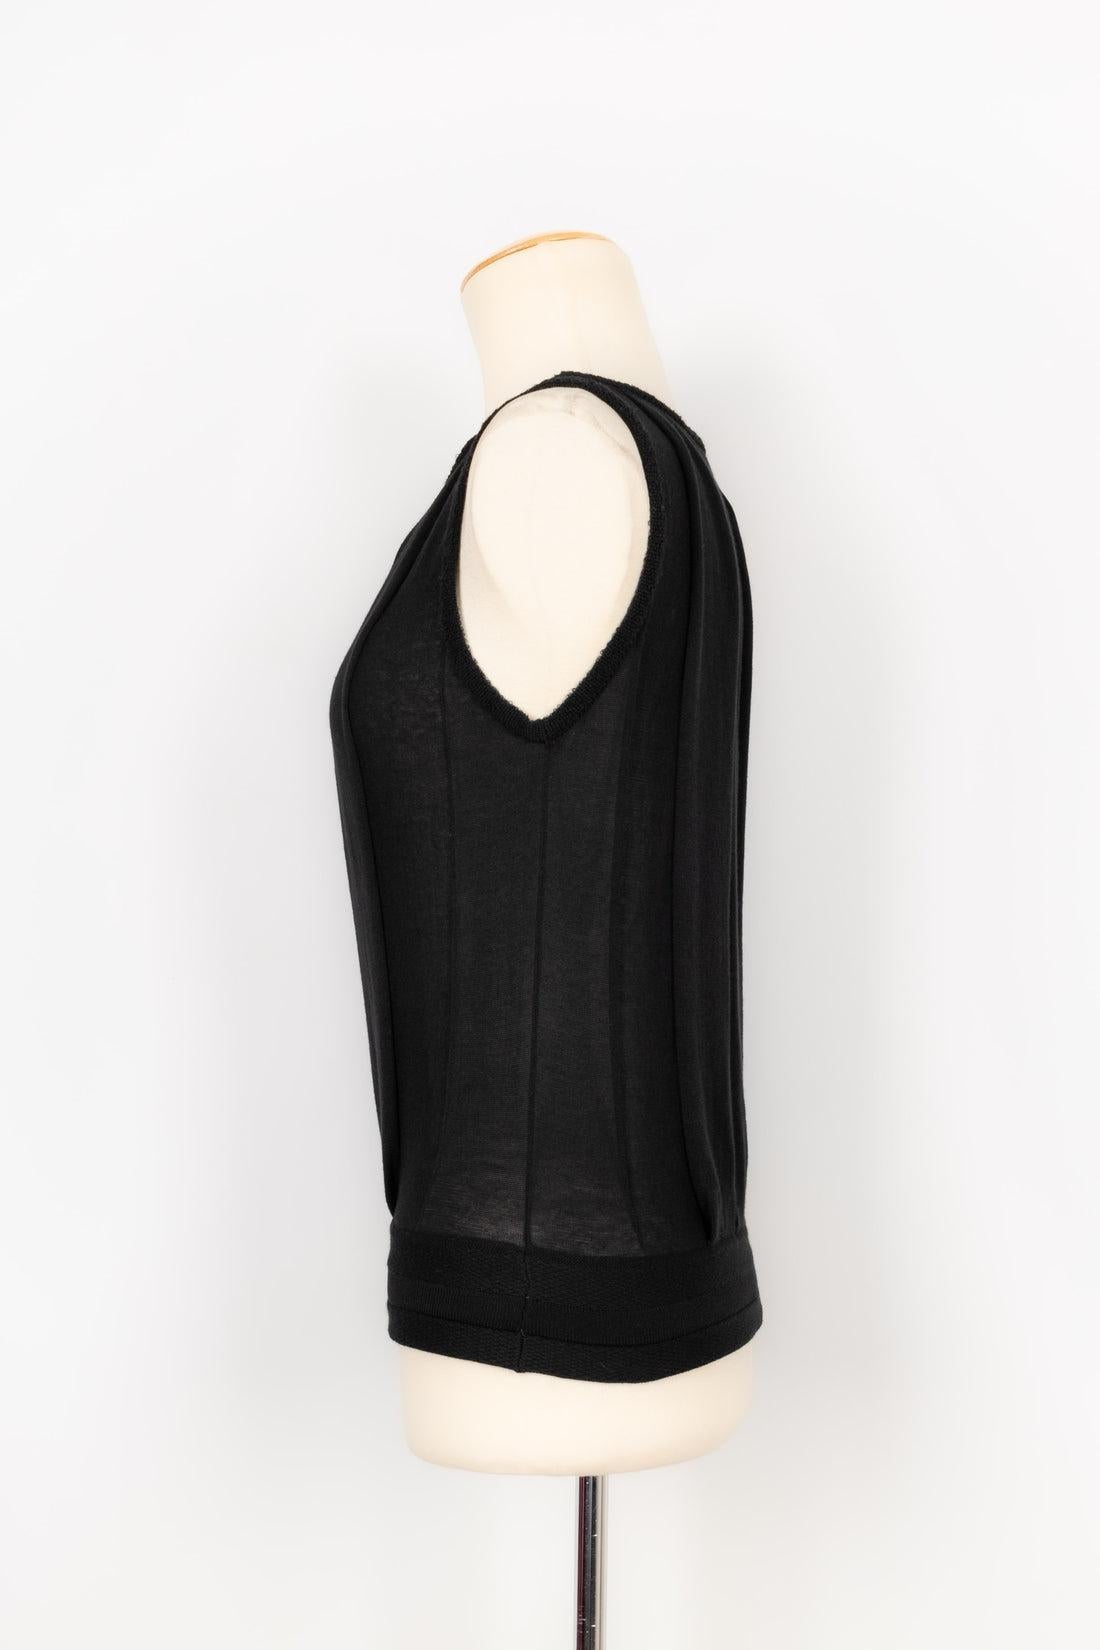 Chanel - Black mesh sleeveless top. No size nor composition label, it fits a 36FR.

Additional information:
Condition: Very good condition
Dimensions: Chest: 42 cm - Length: 54 cm

Seller Reference: FH4